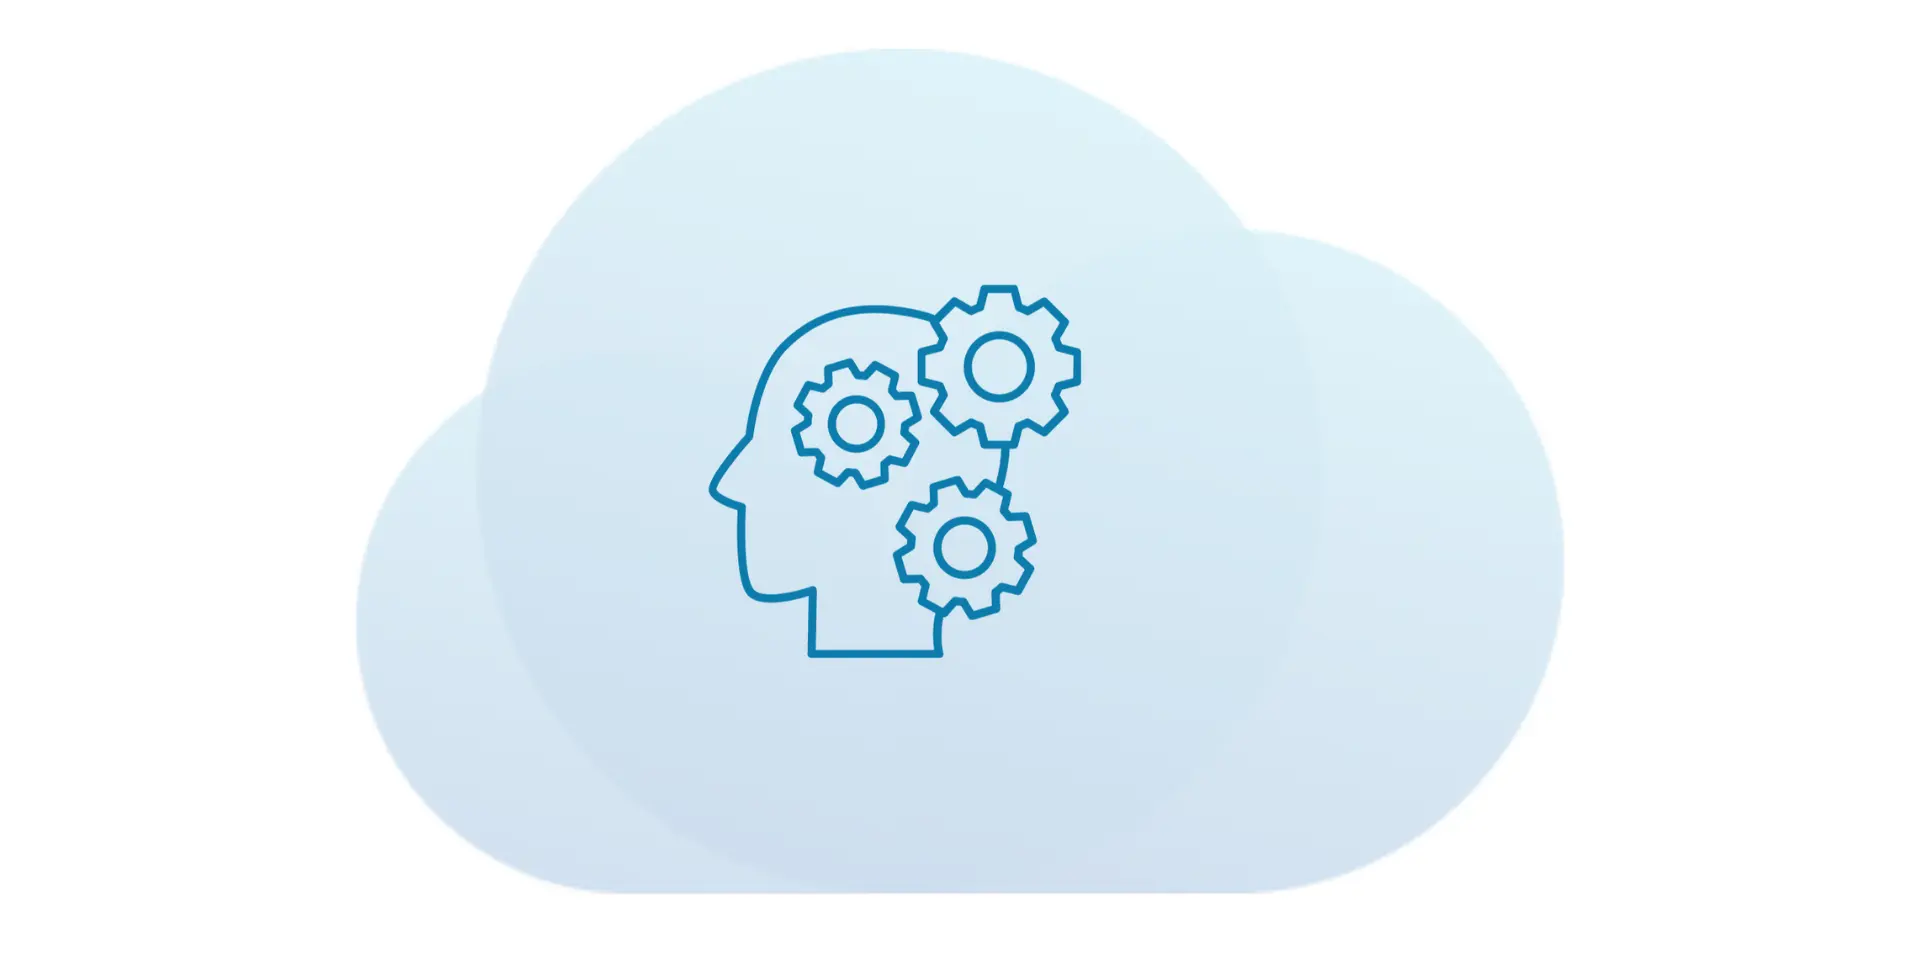 a graphic of a head and the gears turning inside atop a cloud